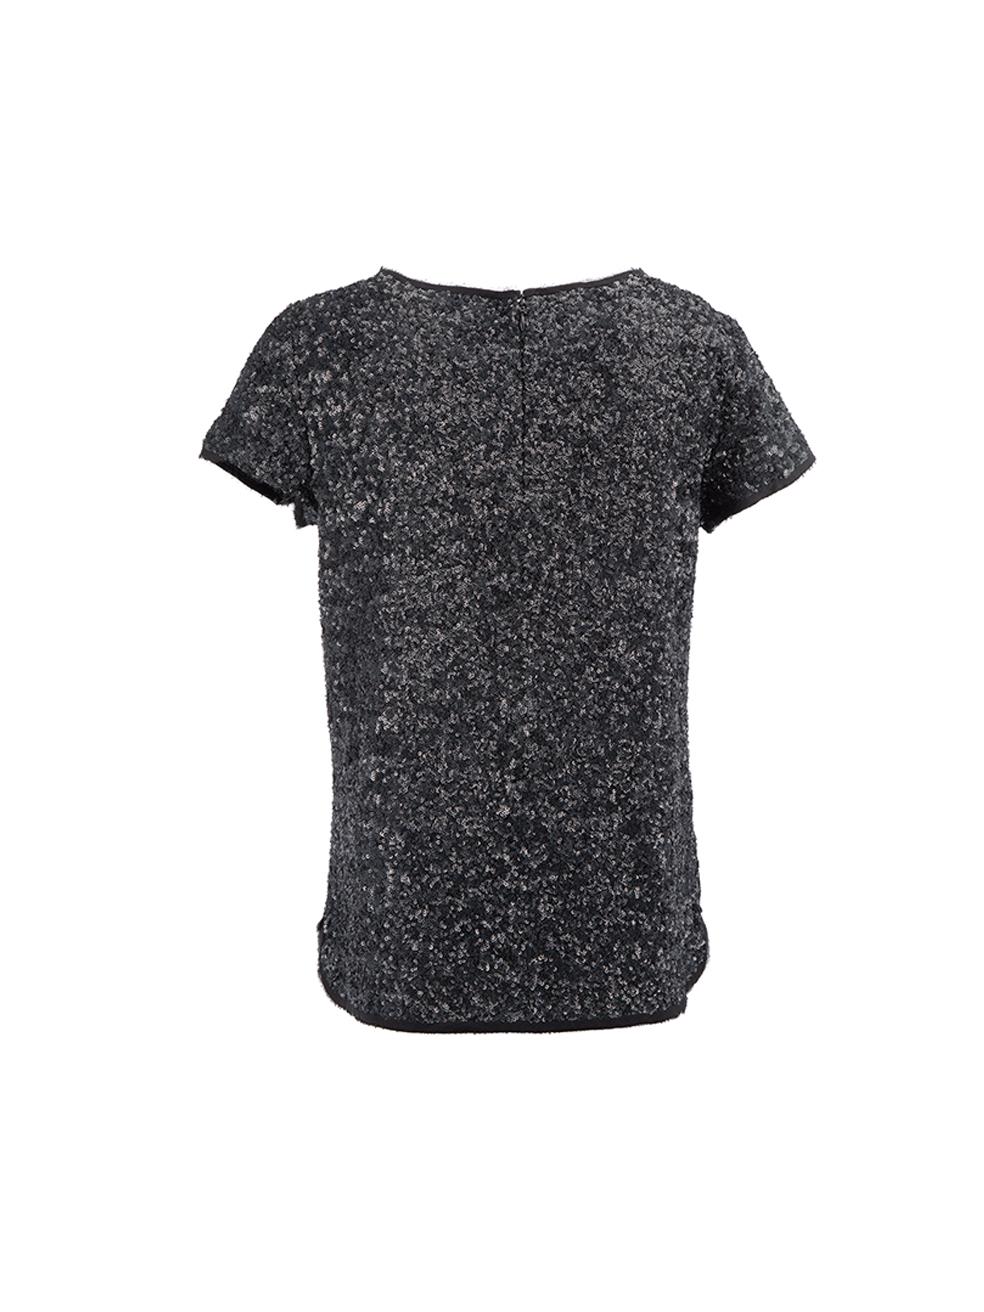 Zadig & Voltaire Deluxe Anthracite Sequinned Top Size S In Good Condition For Sale In London, GB